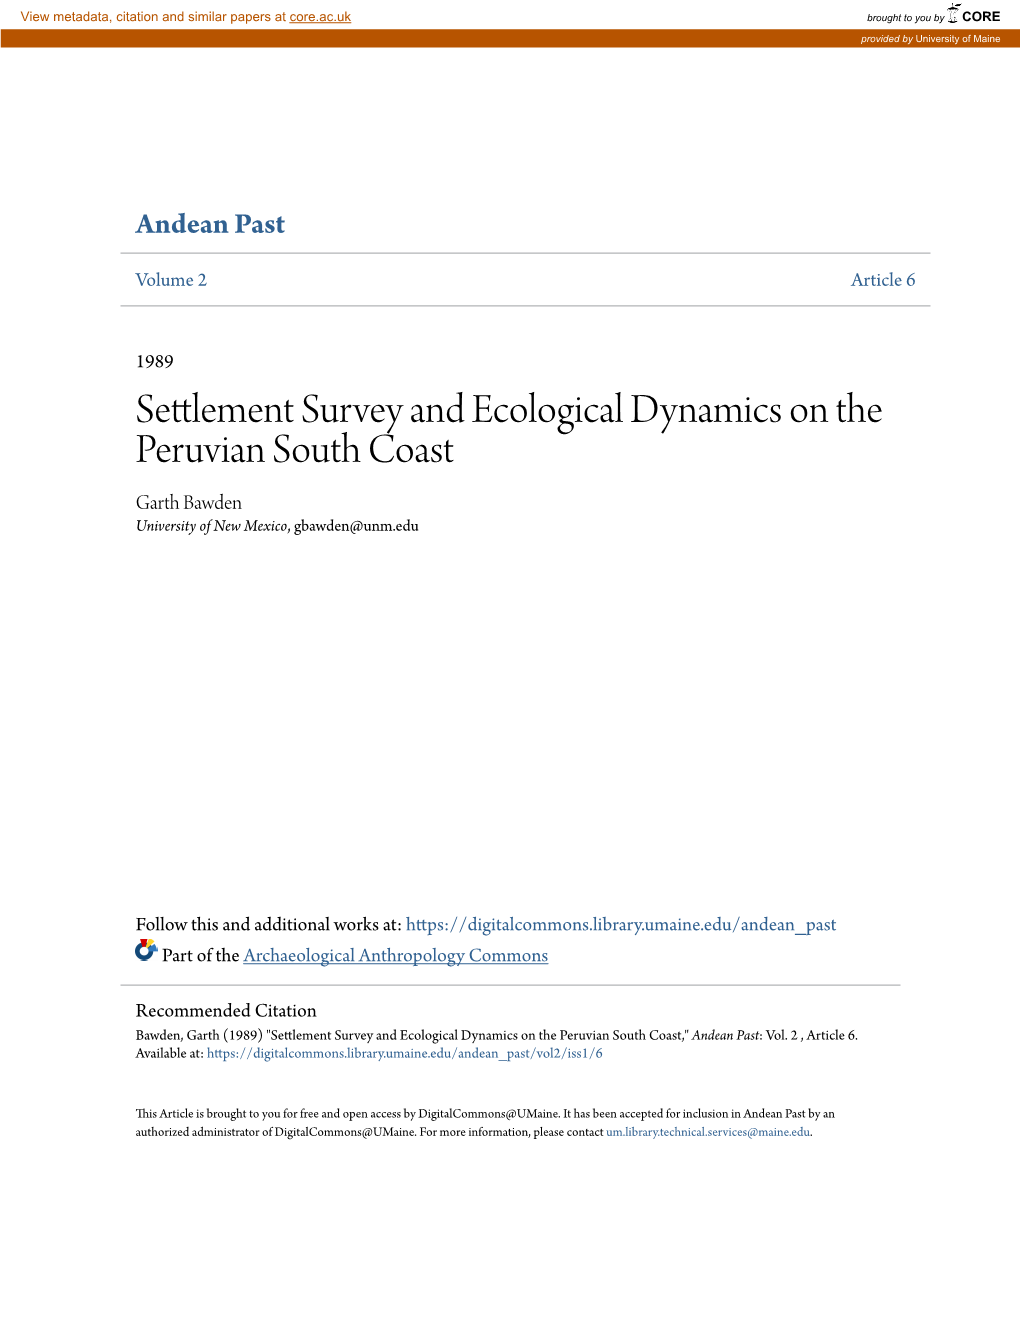 Settlement Survey and Ecological Dynamics on the Peruvian South Coast Garth Bawden University of New Mexico, Gbawden@Unm.Edu